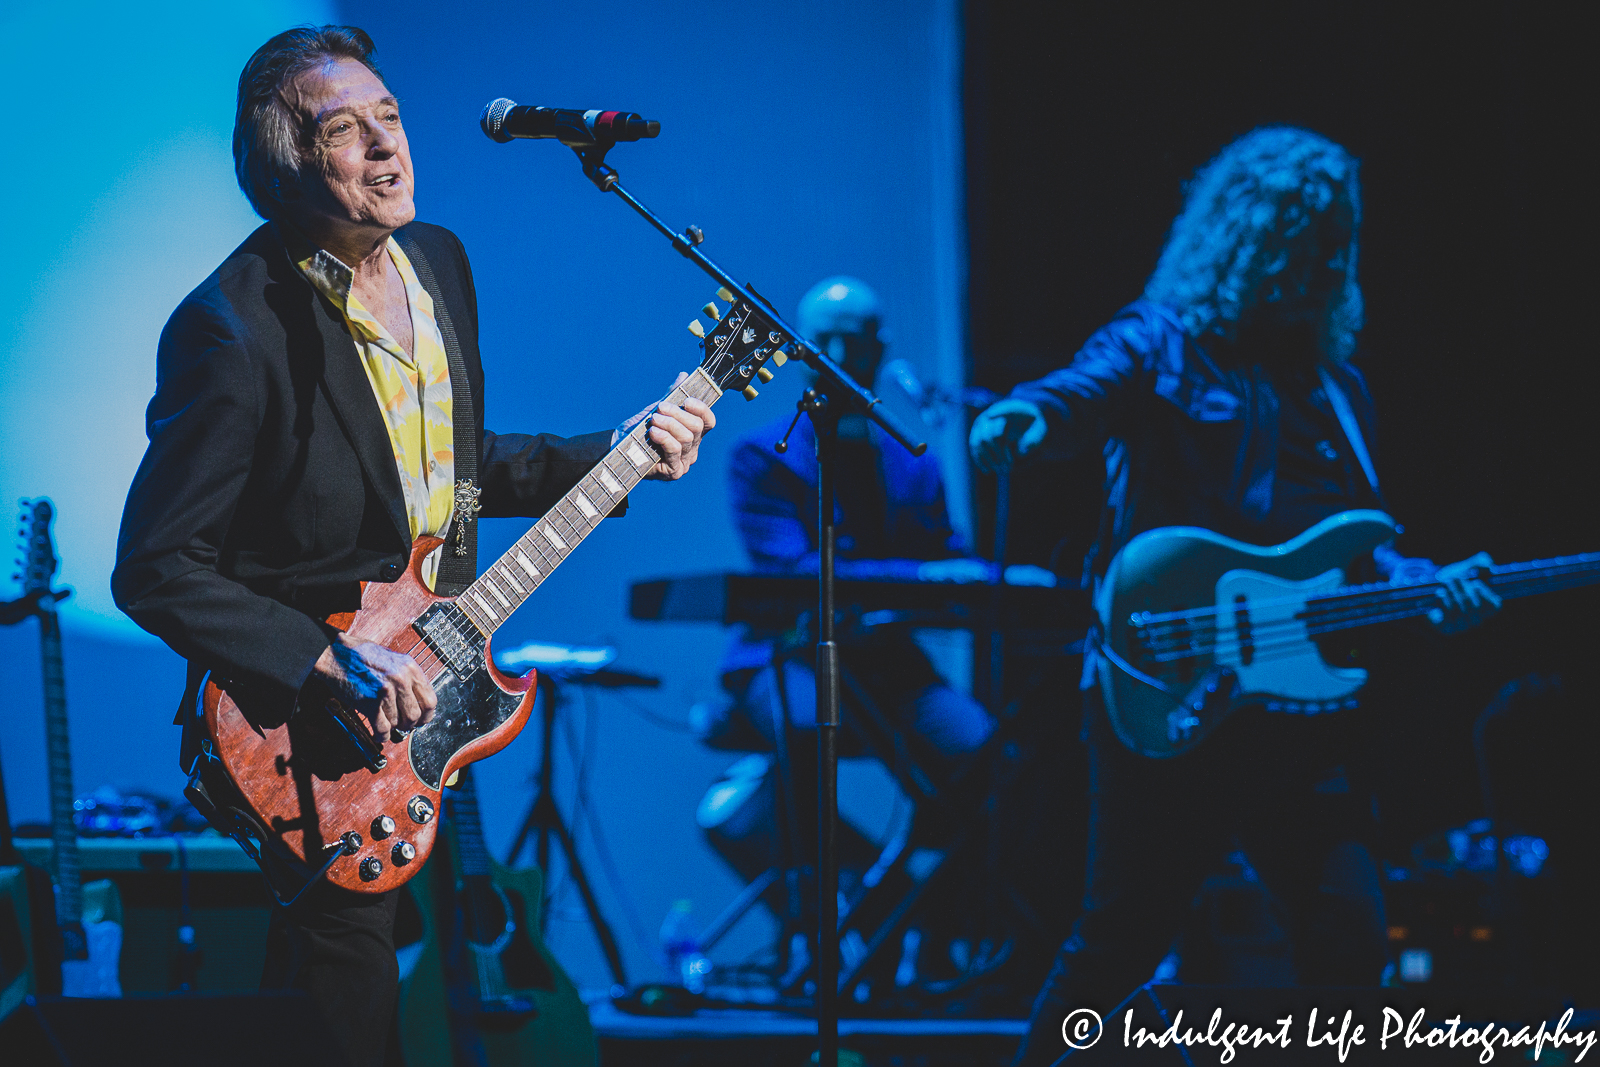 Denny Laine of The Moody Blues and Wings live in concert with Jason Scheff formerly of Chicago at Kauffman Center for the Performing Arts in Kansas City, MO on March 27, 2022.